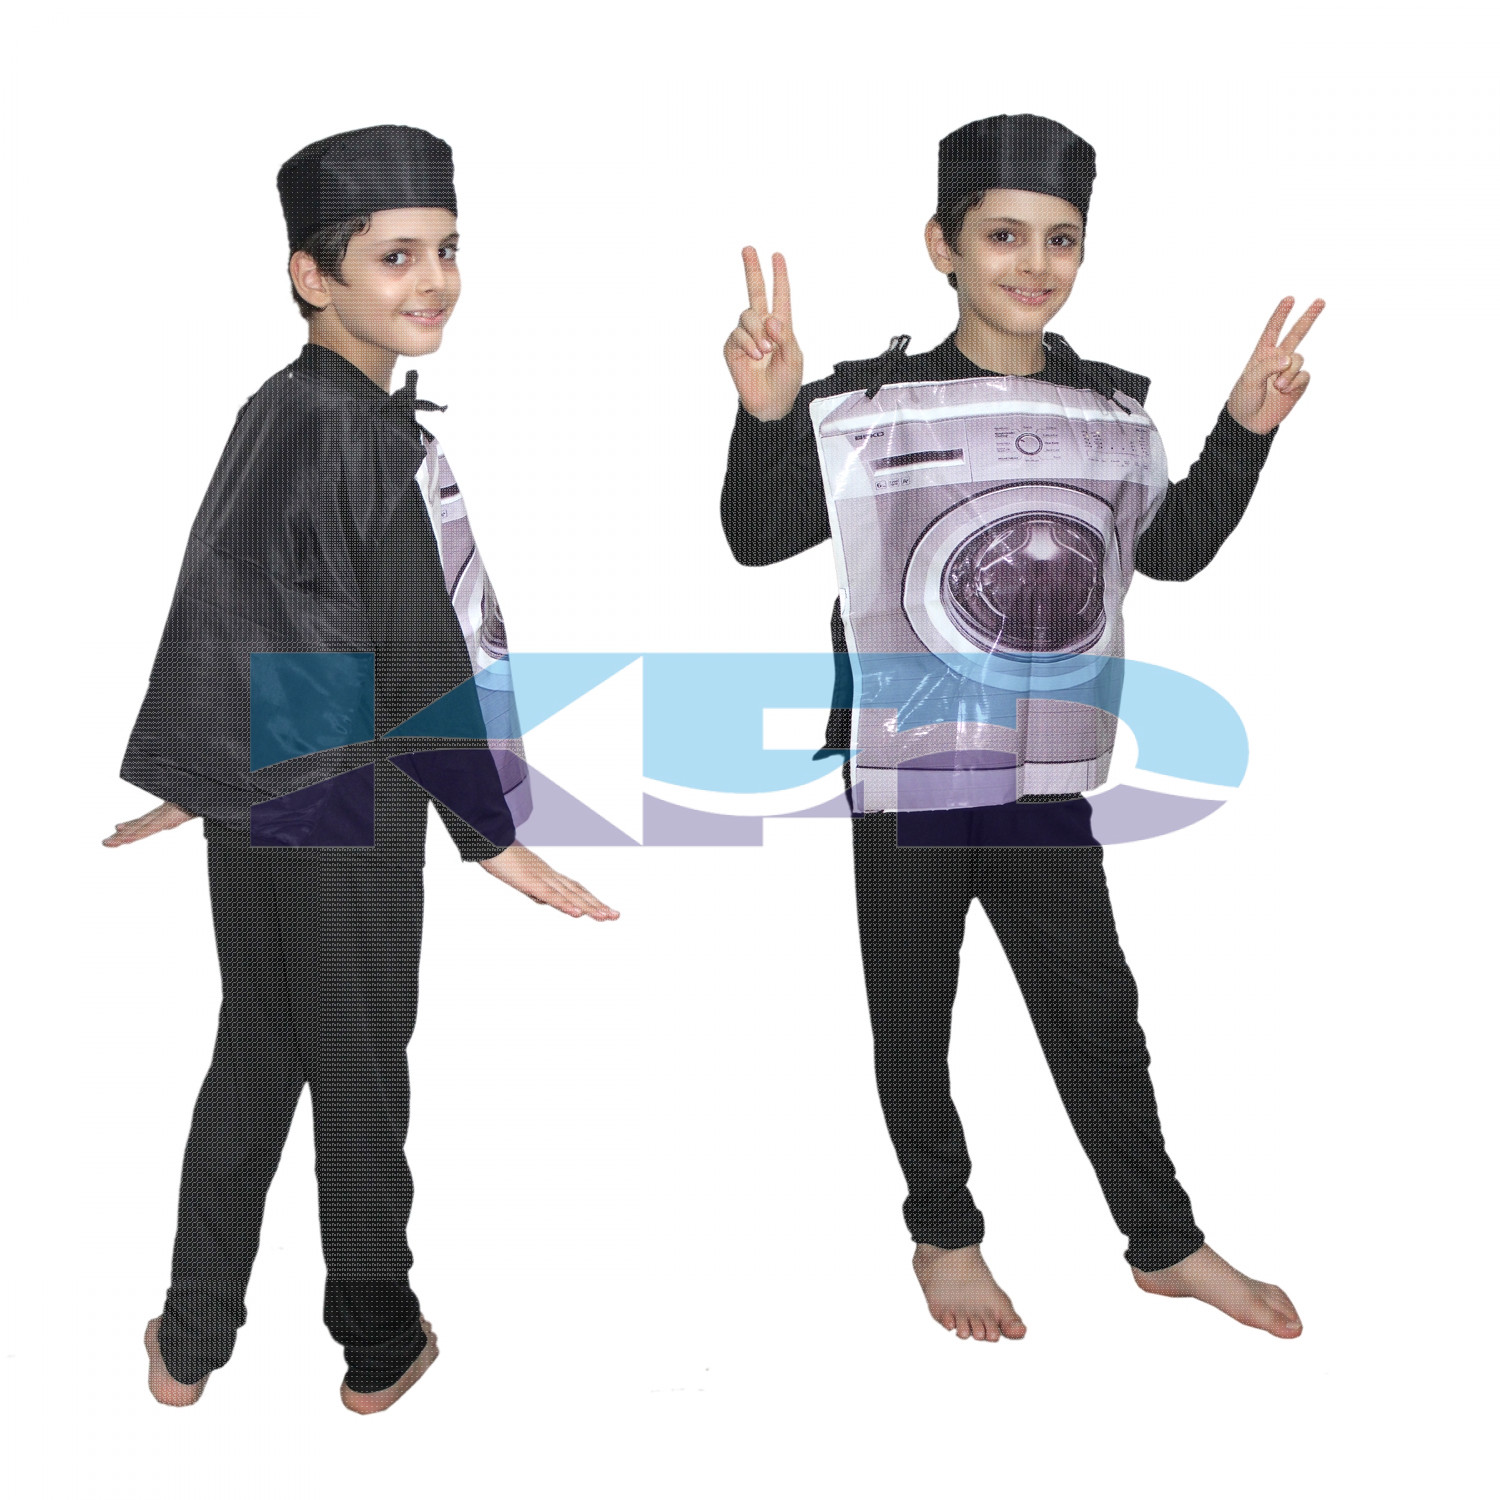 Washing Machine Object Costume For Kids School Annual function/Theme Party/Competition/Stage Shows Dress